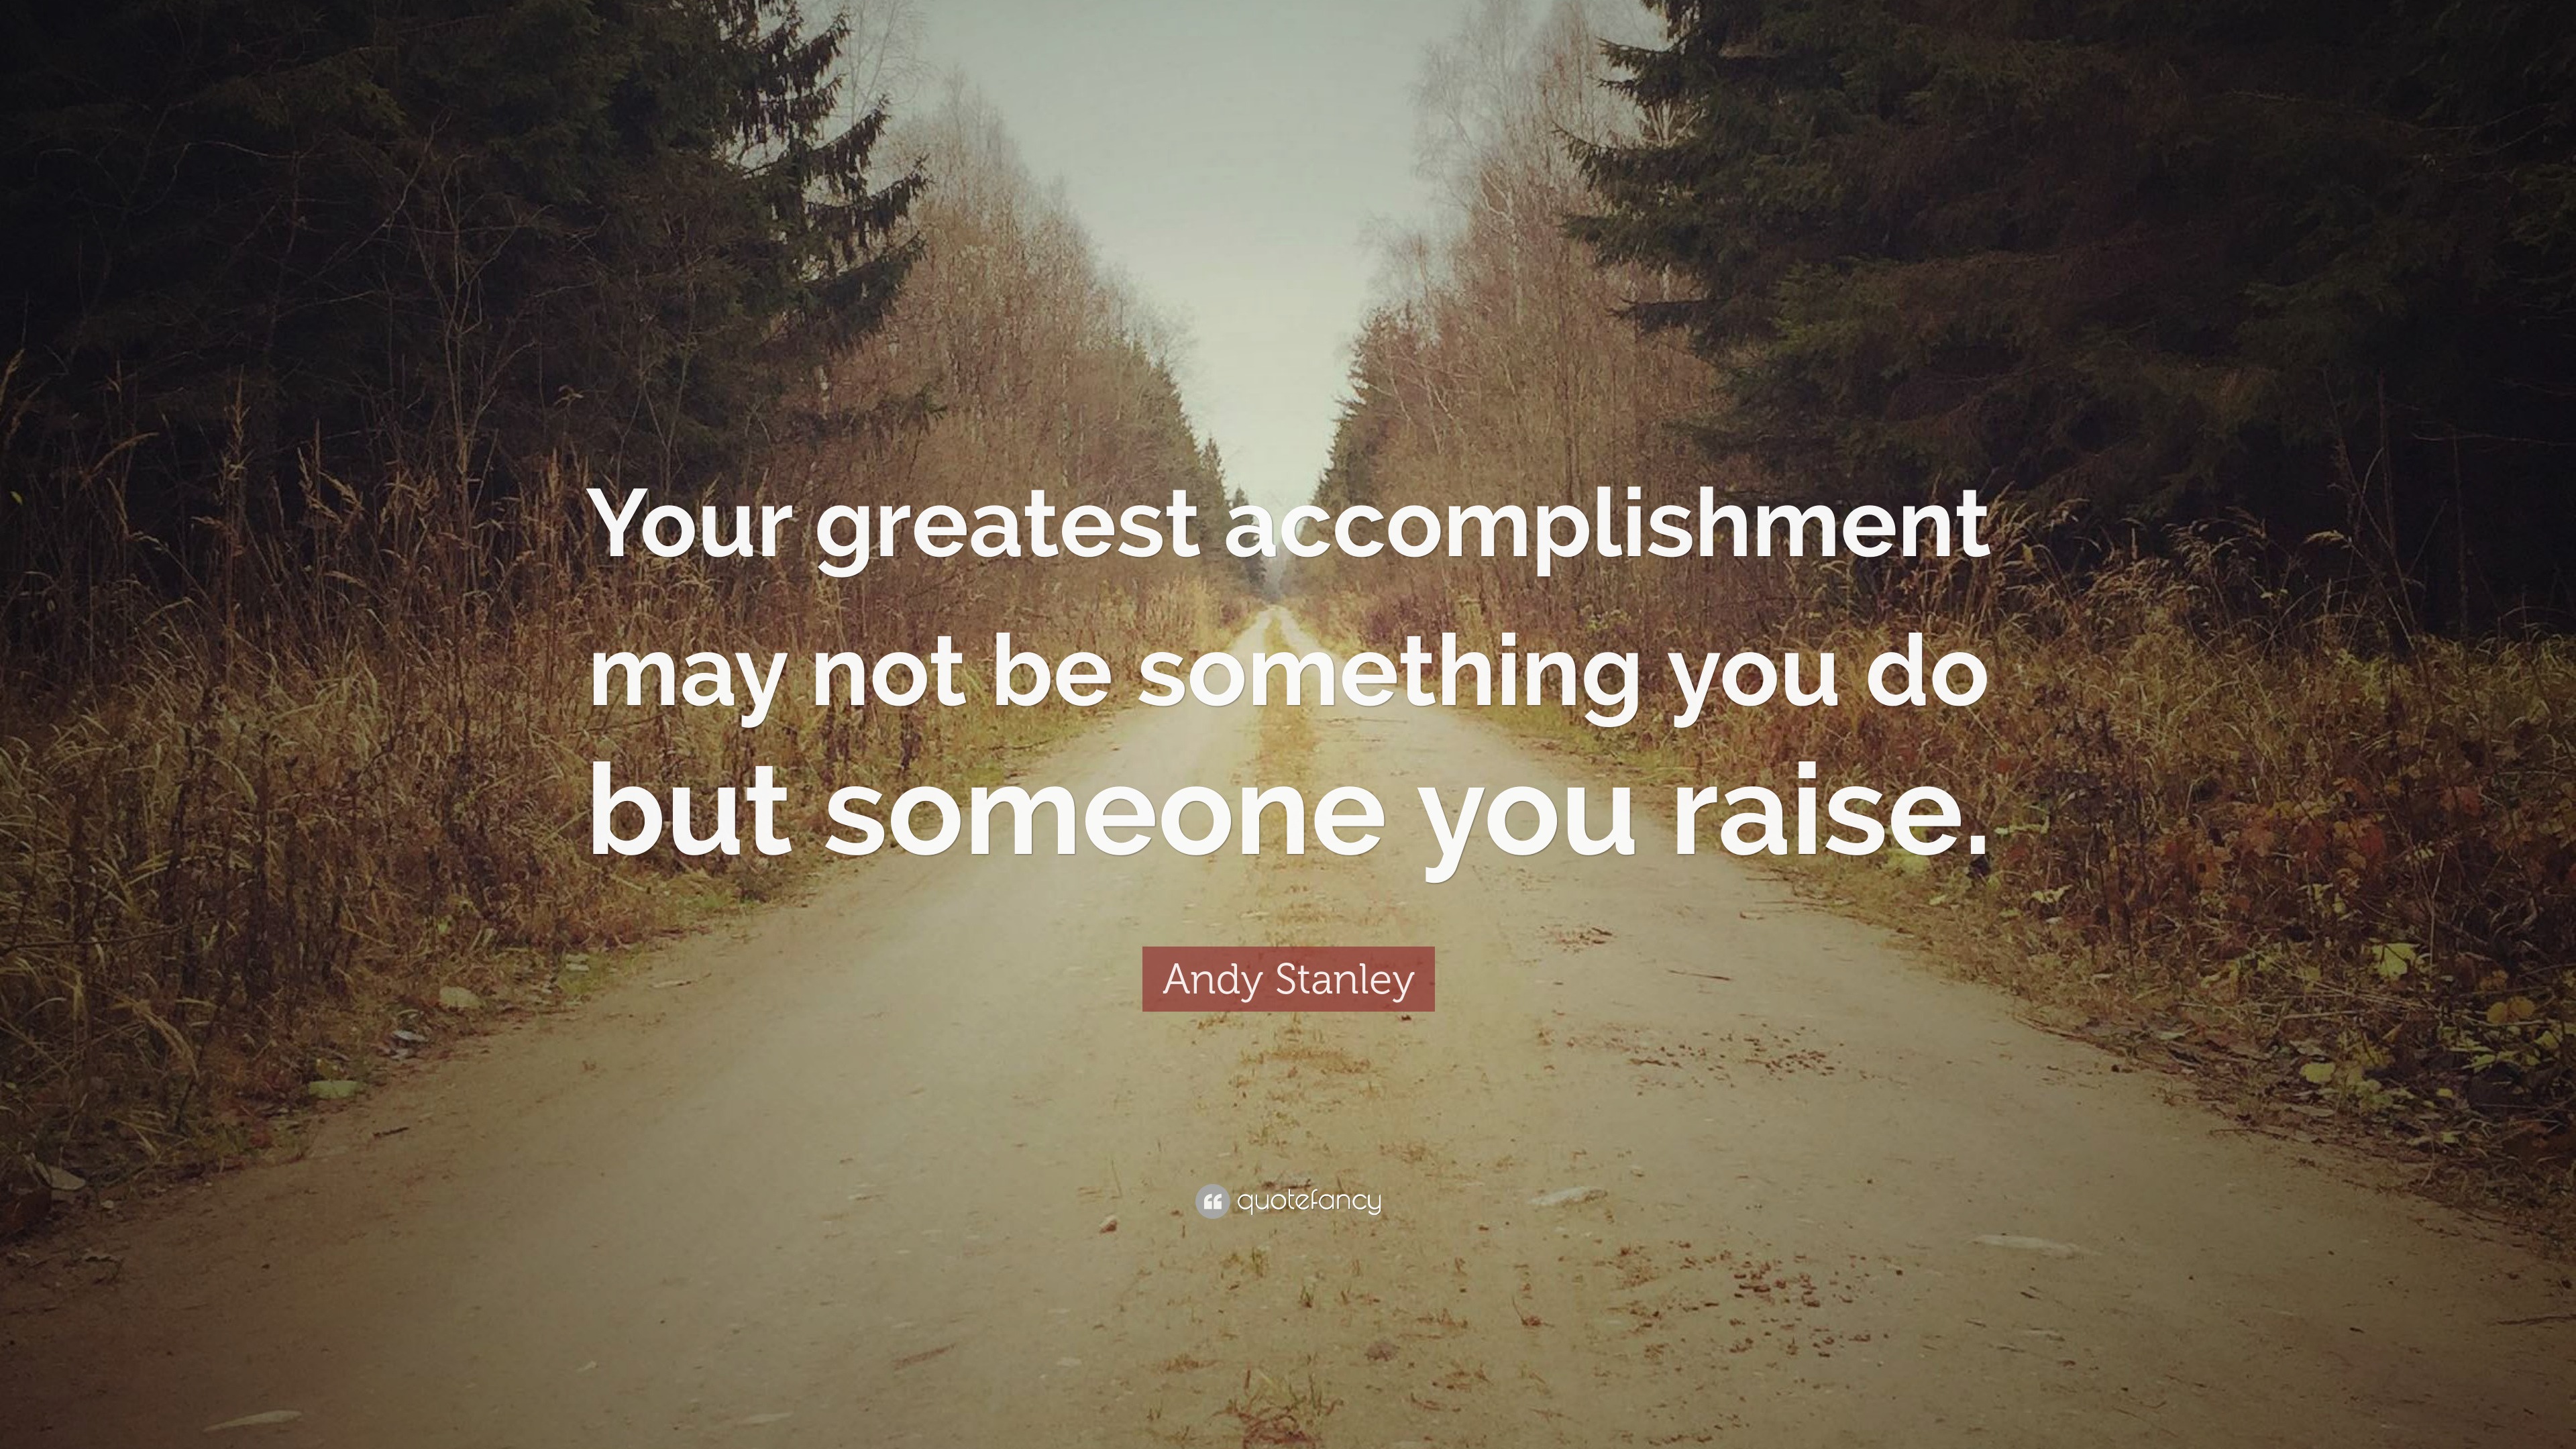 Andy Stanley Quote: “Your greatest accomplishment may not be something